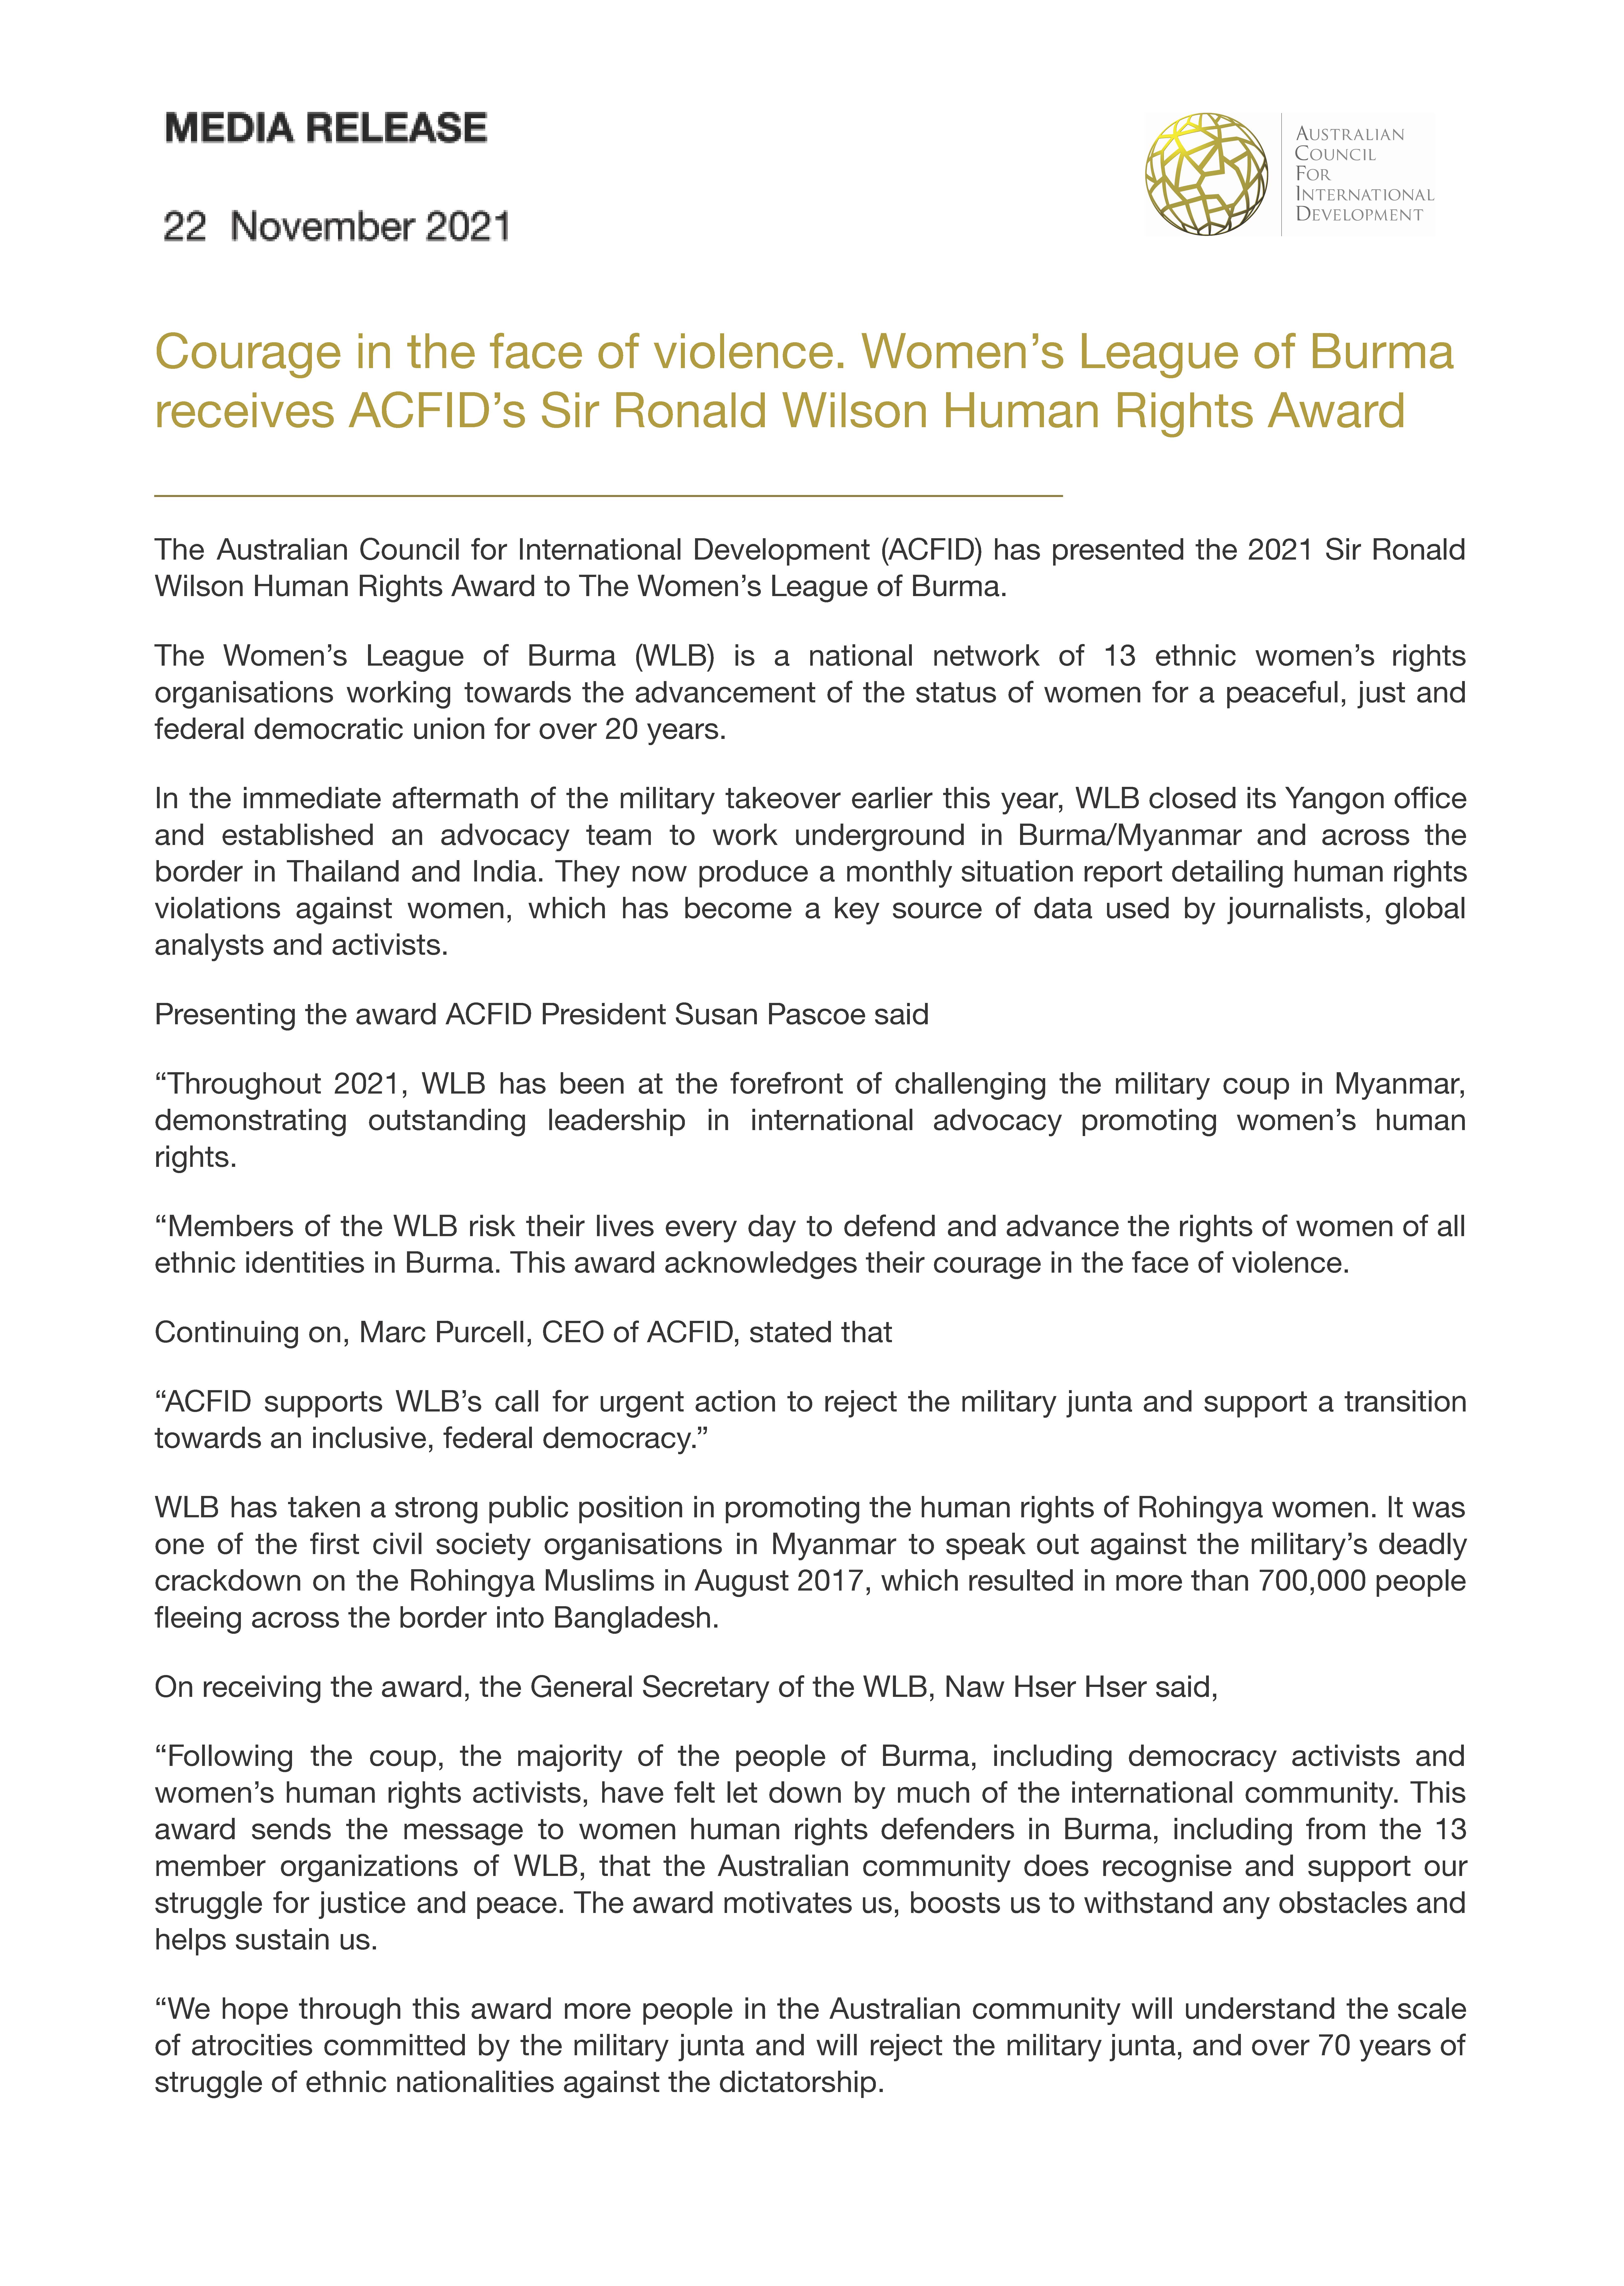 Courage in the face of violence. Women's League of Burma receives ACFID's Sir Ronald Wilson Human Rights Award 